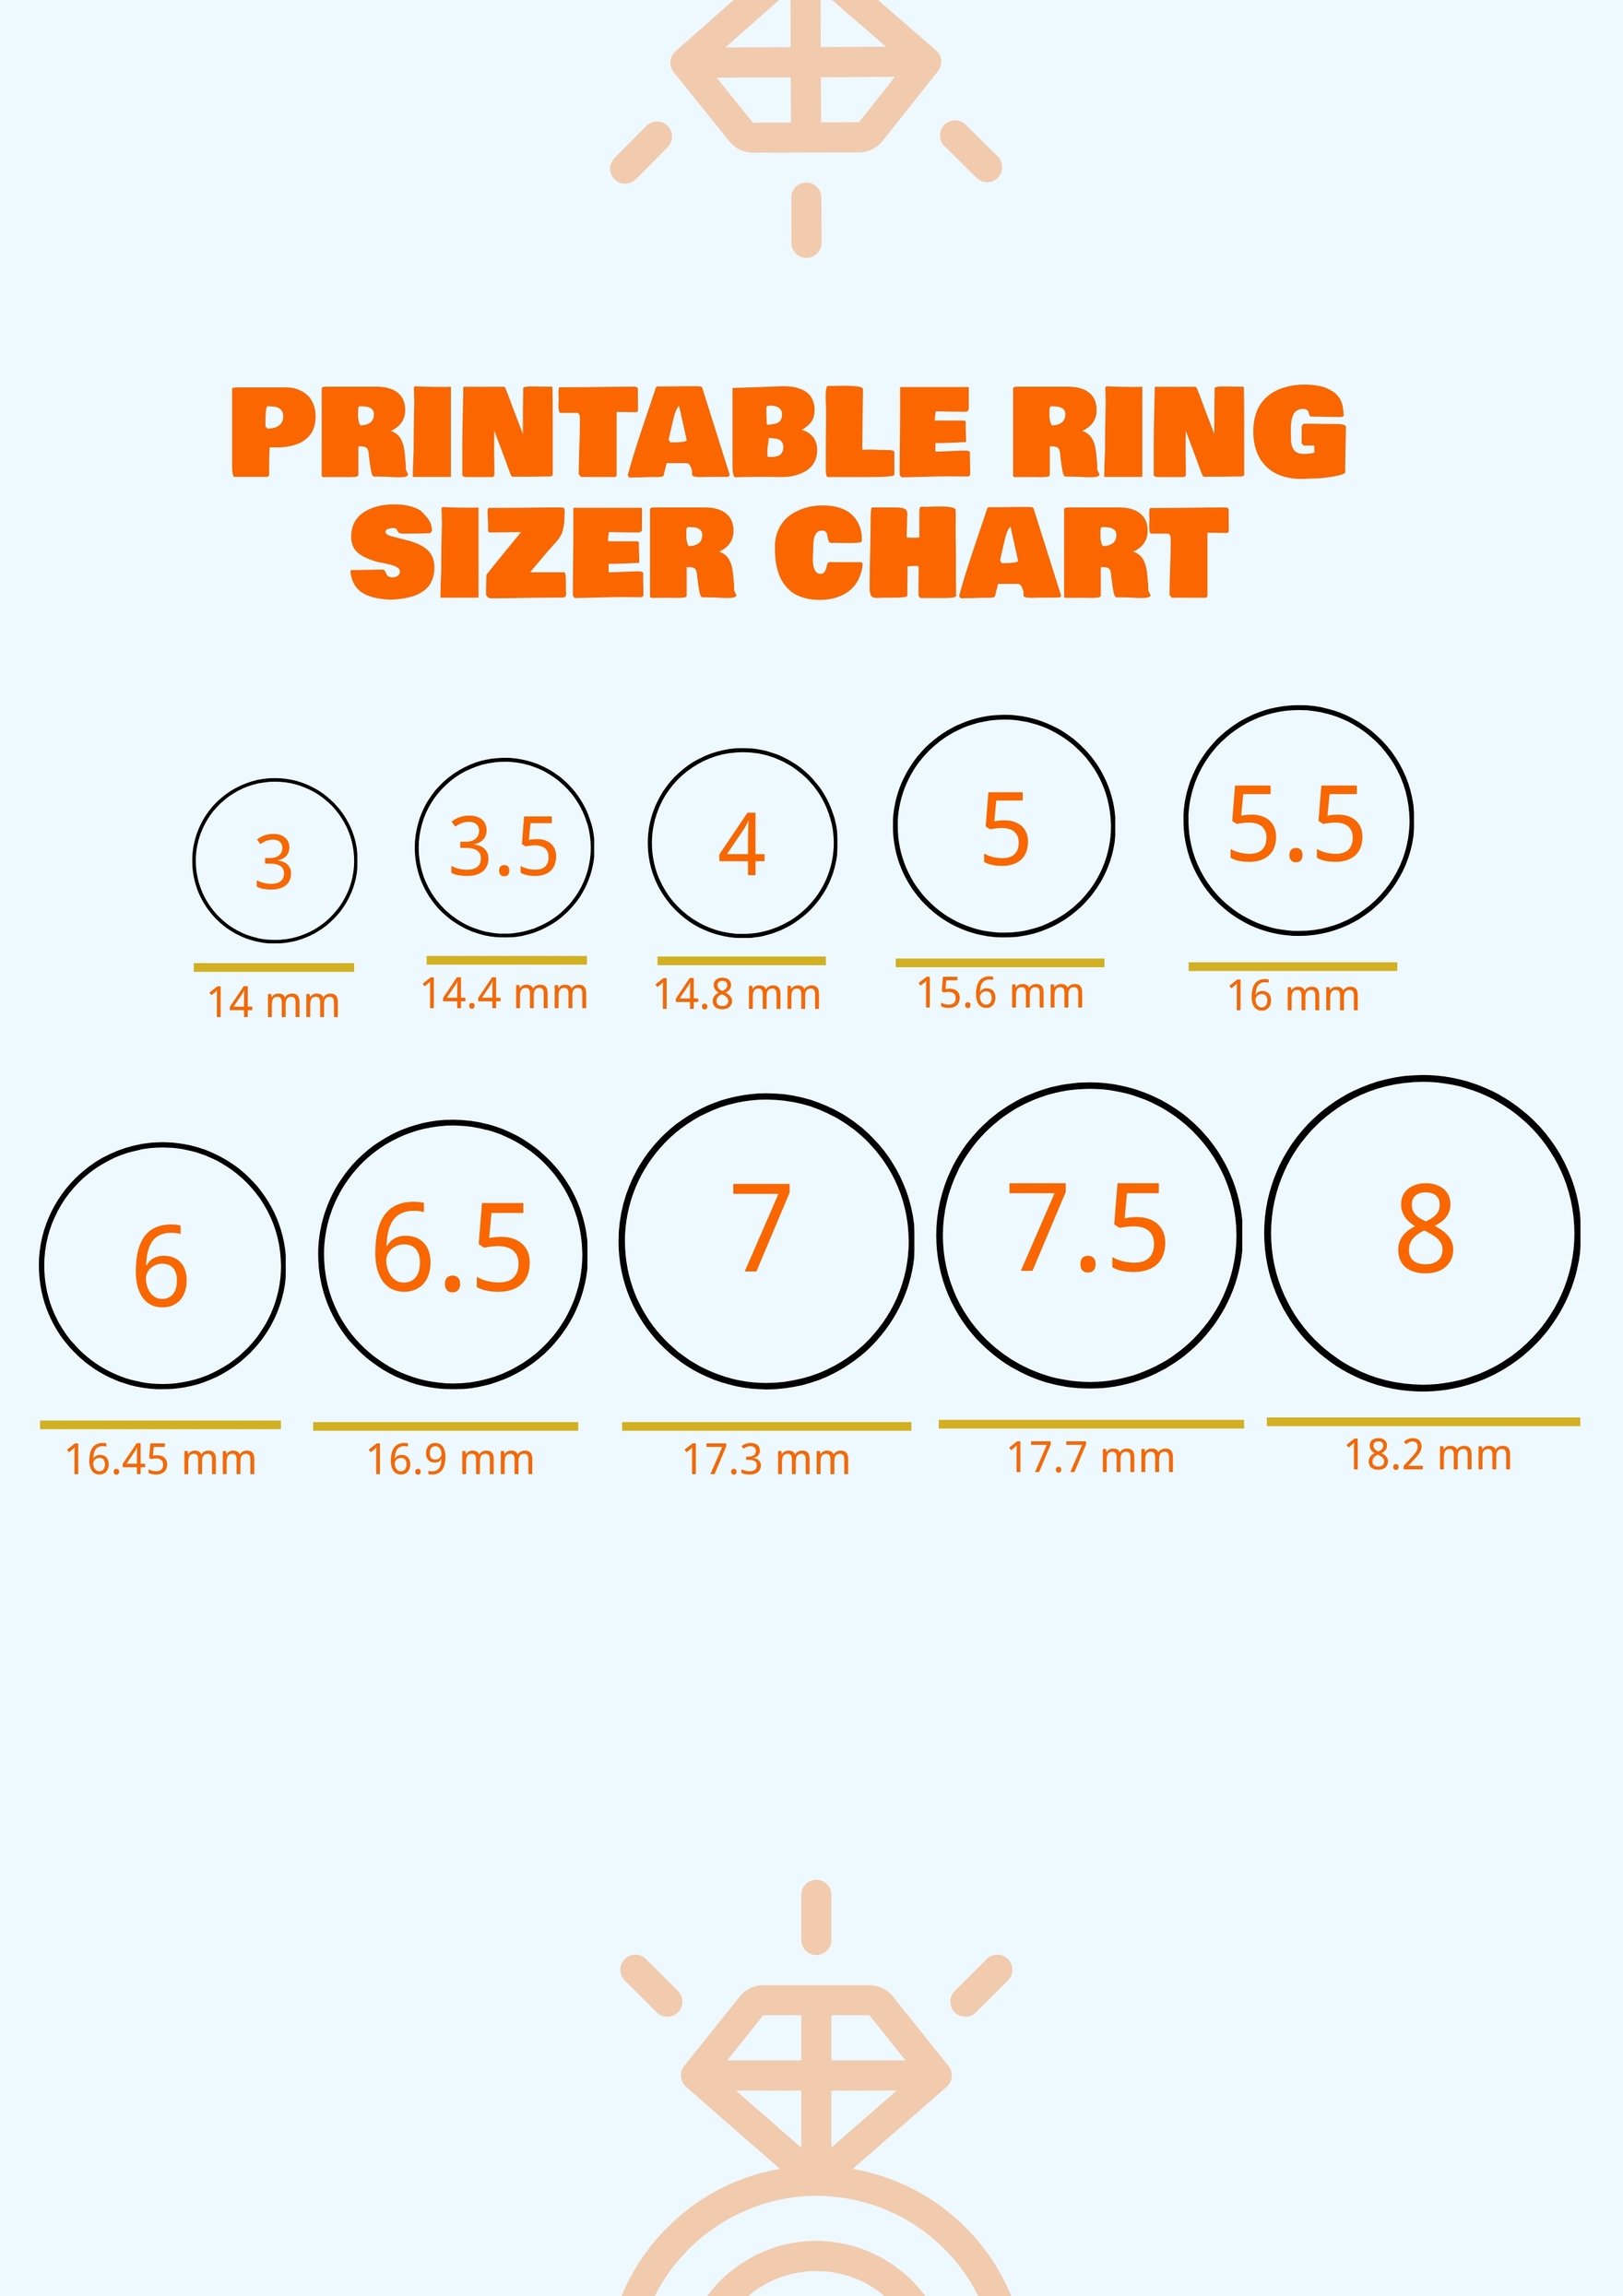 Personal Printable Ring Sizer Chart Template